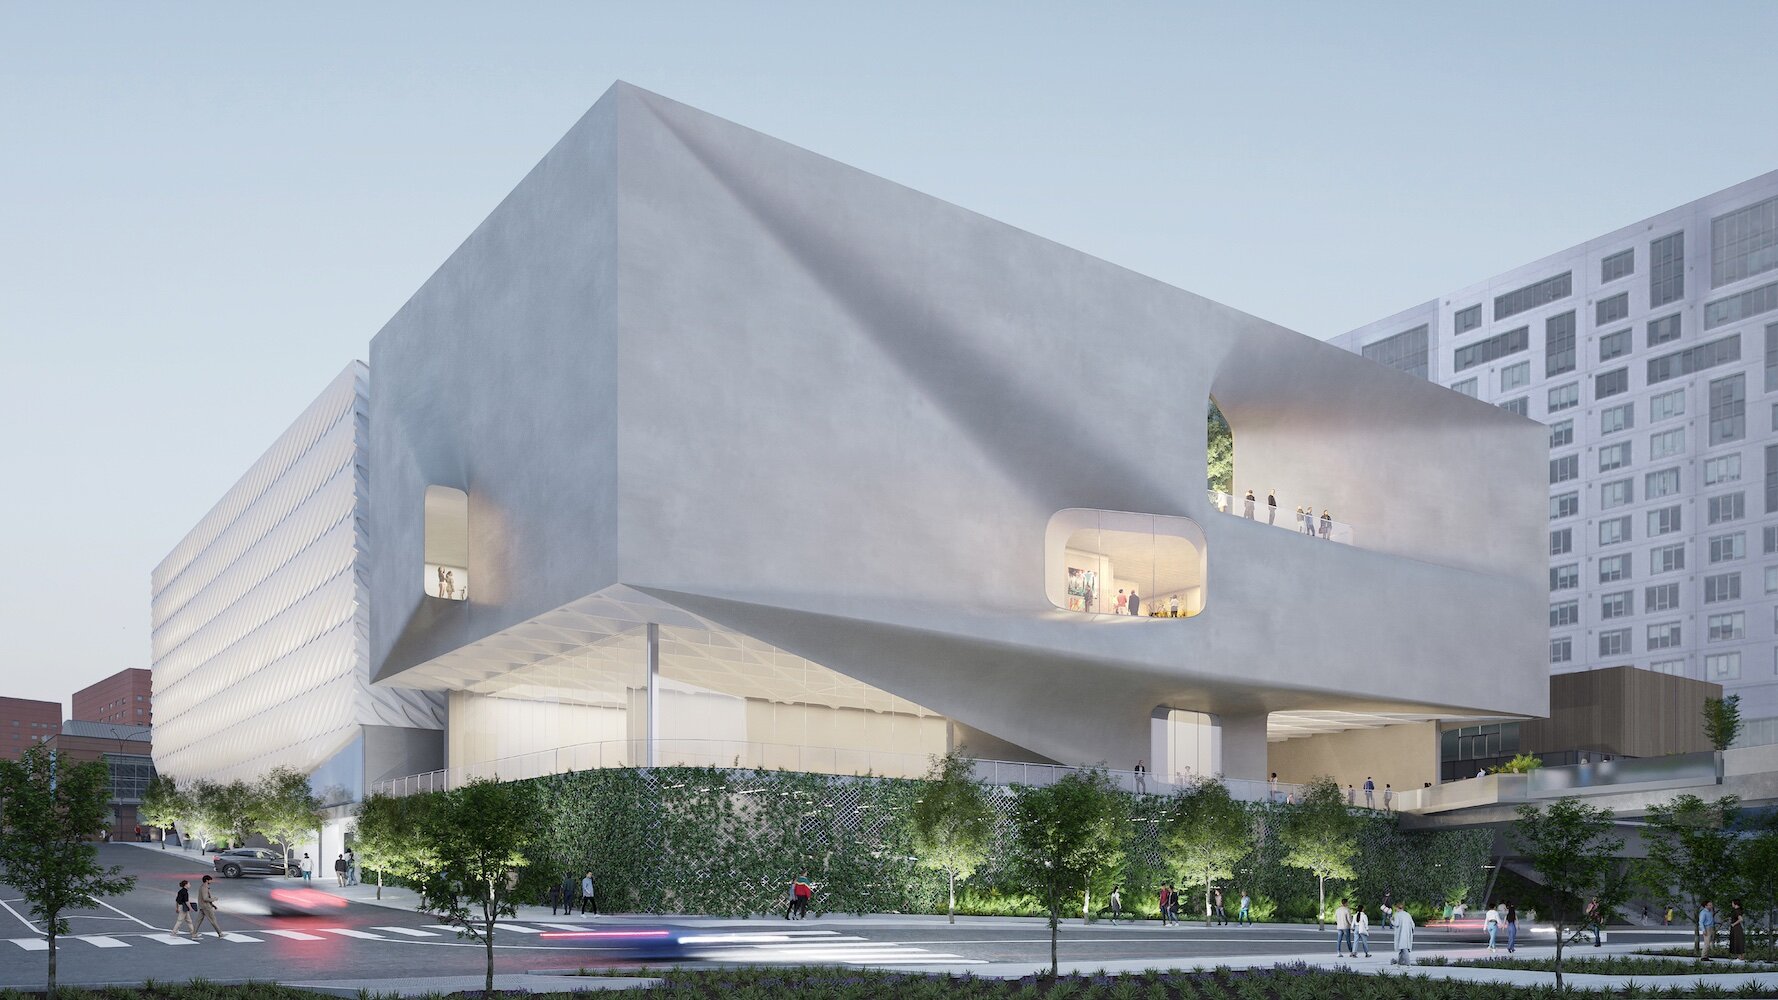 Diller Scofidio + Renfro Returns to The Broad in Los Angeles for $100 Million Expansion Project